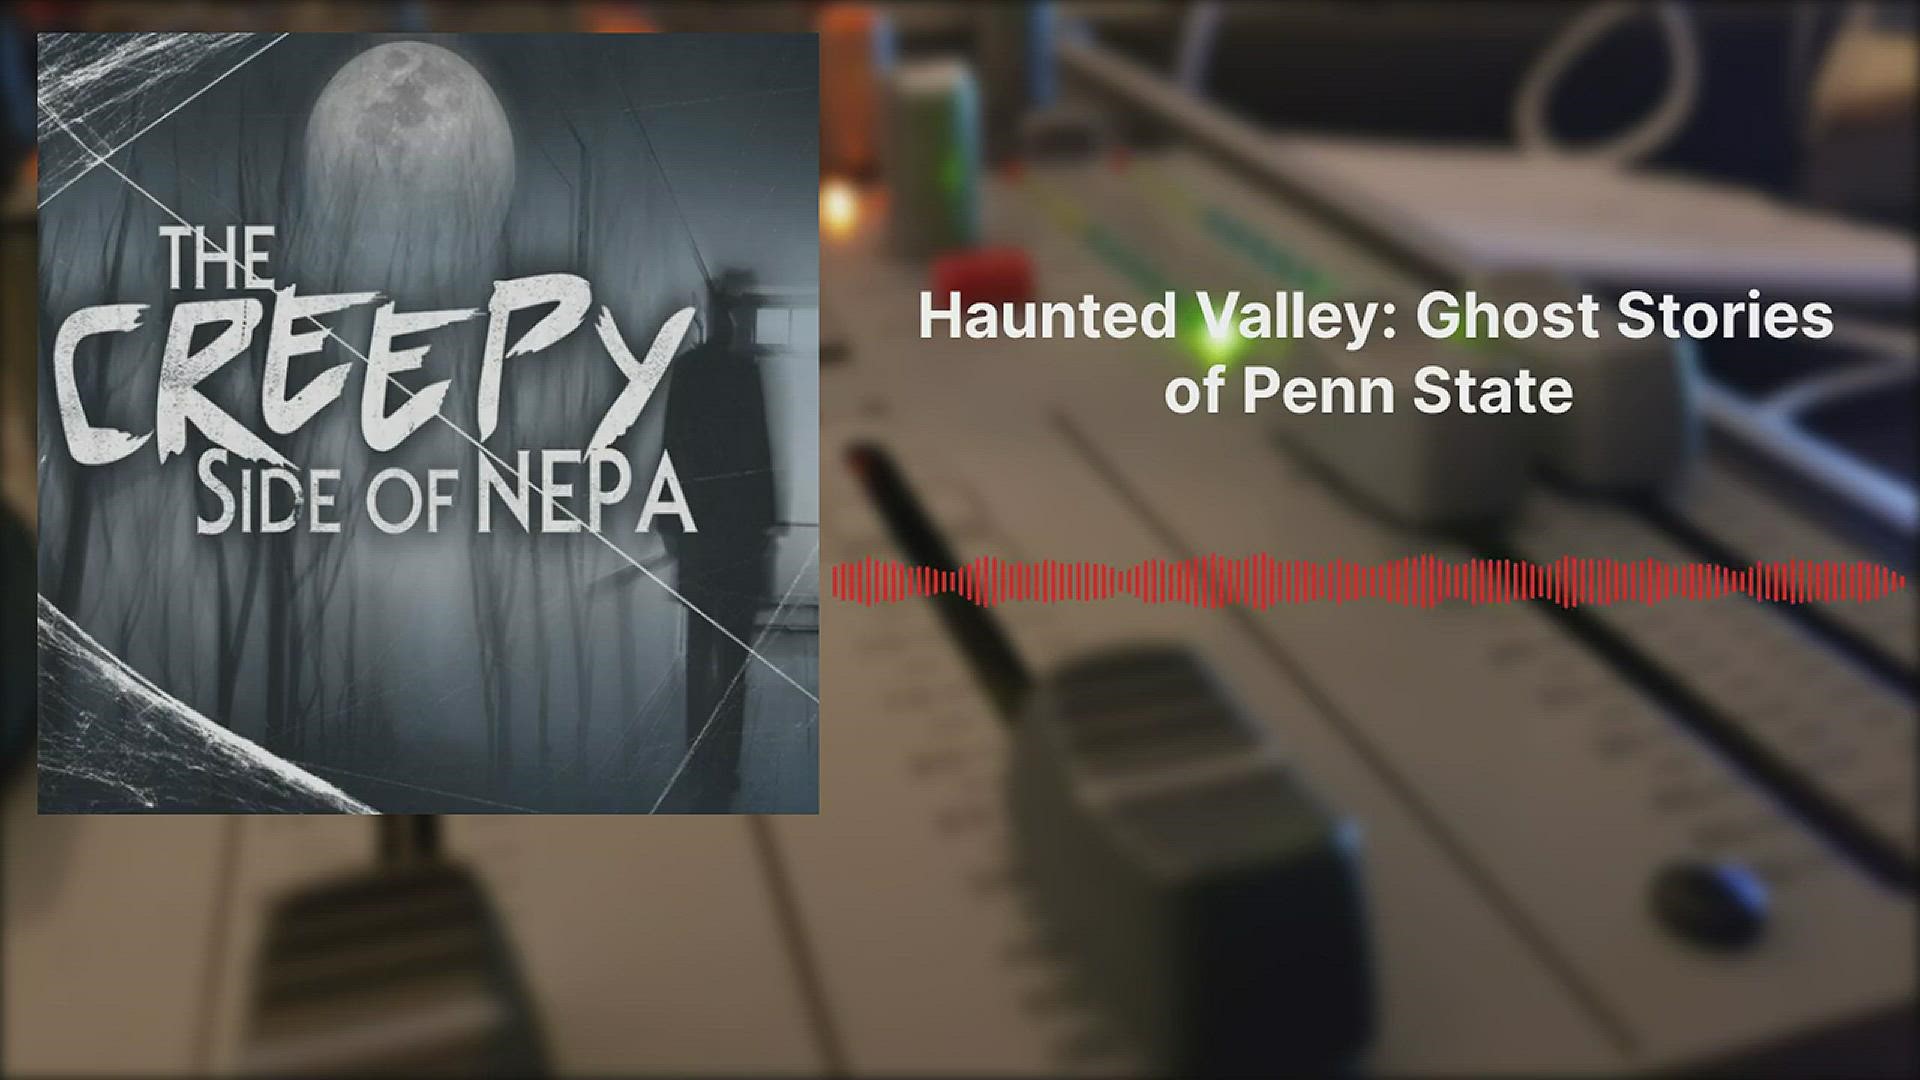 On this episode of The Creepy Side of NEPA, we talk with Matt Swayne, author of Haunted Valley: The Ghosts of Penn State.